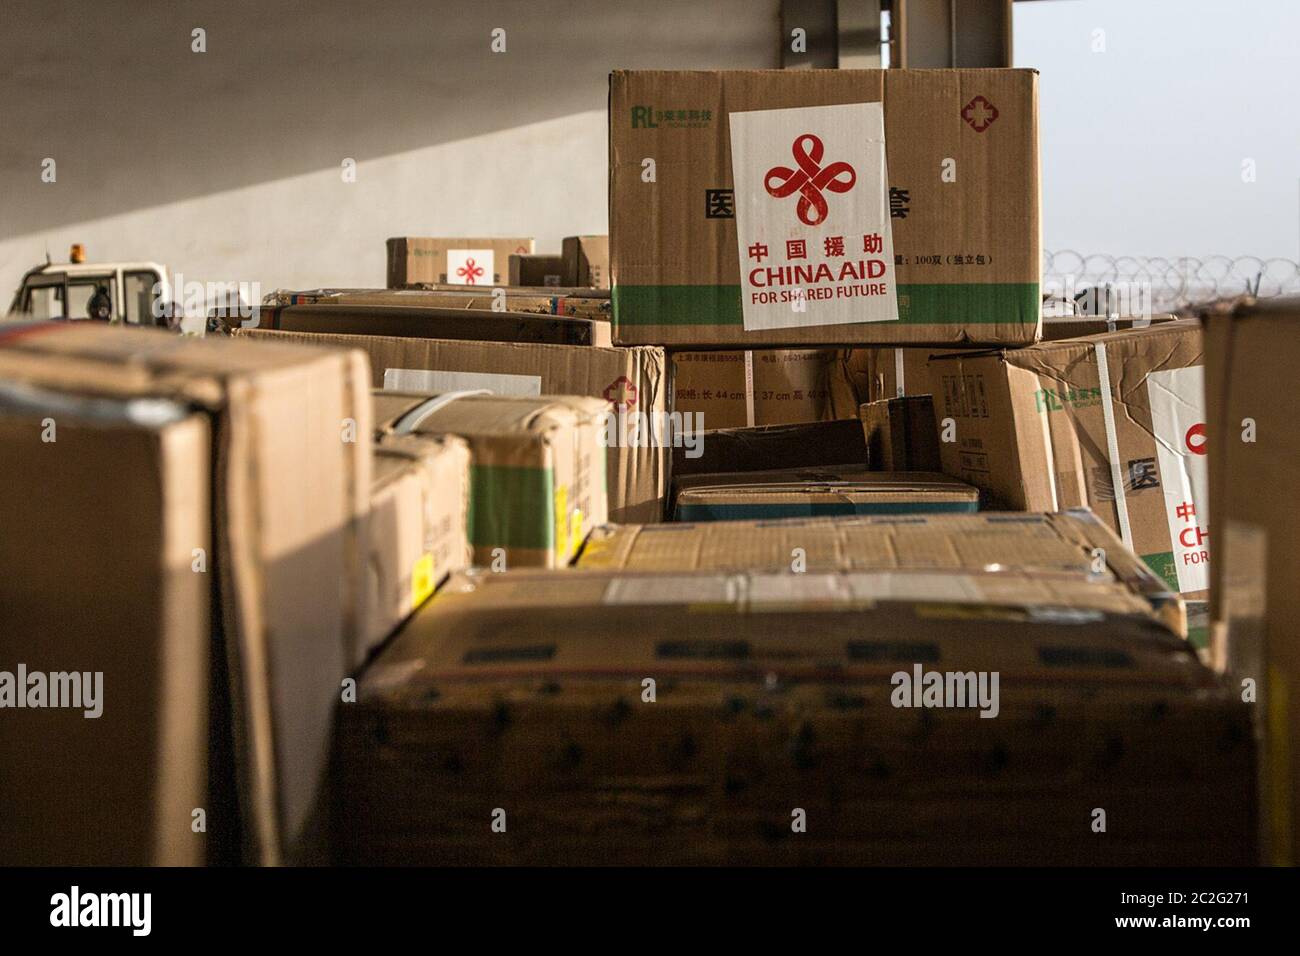 Beijing, Senegal. 20th Apr, 2020. The second batch of medical aids offered by Chinese government is pictured at Blaise Diagne International Airport in Dakar, Senegal, April 20, 2020. TO GO WITH XINHUA HEADLINES OF JUNE 17, 2020 Credit: Eddy Peters/Xinhua/Alamy Live News Stock Photo